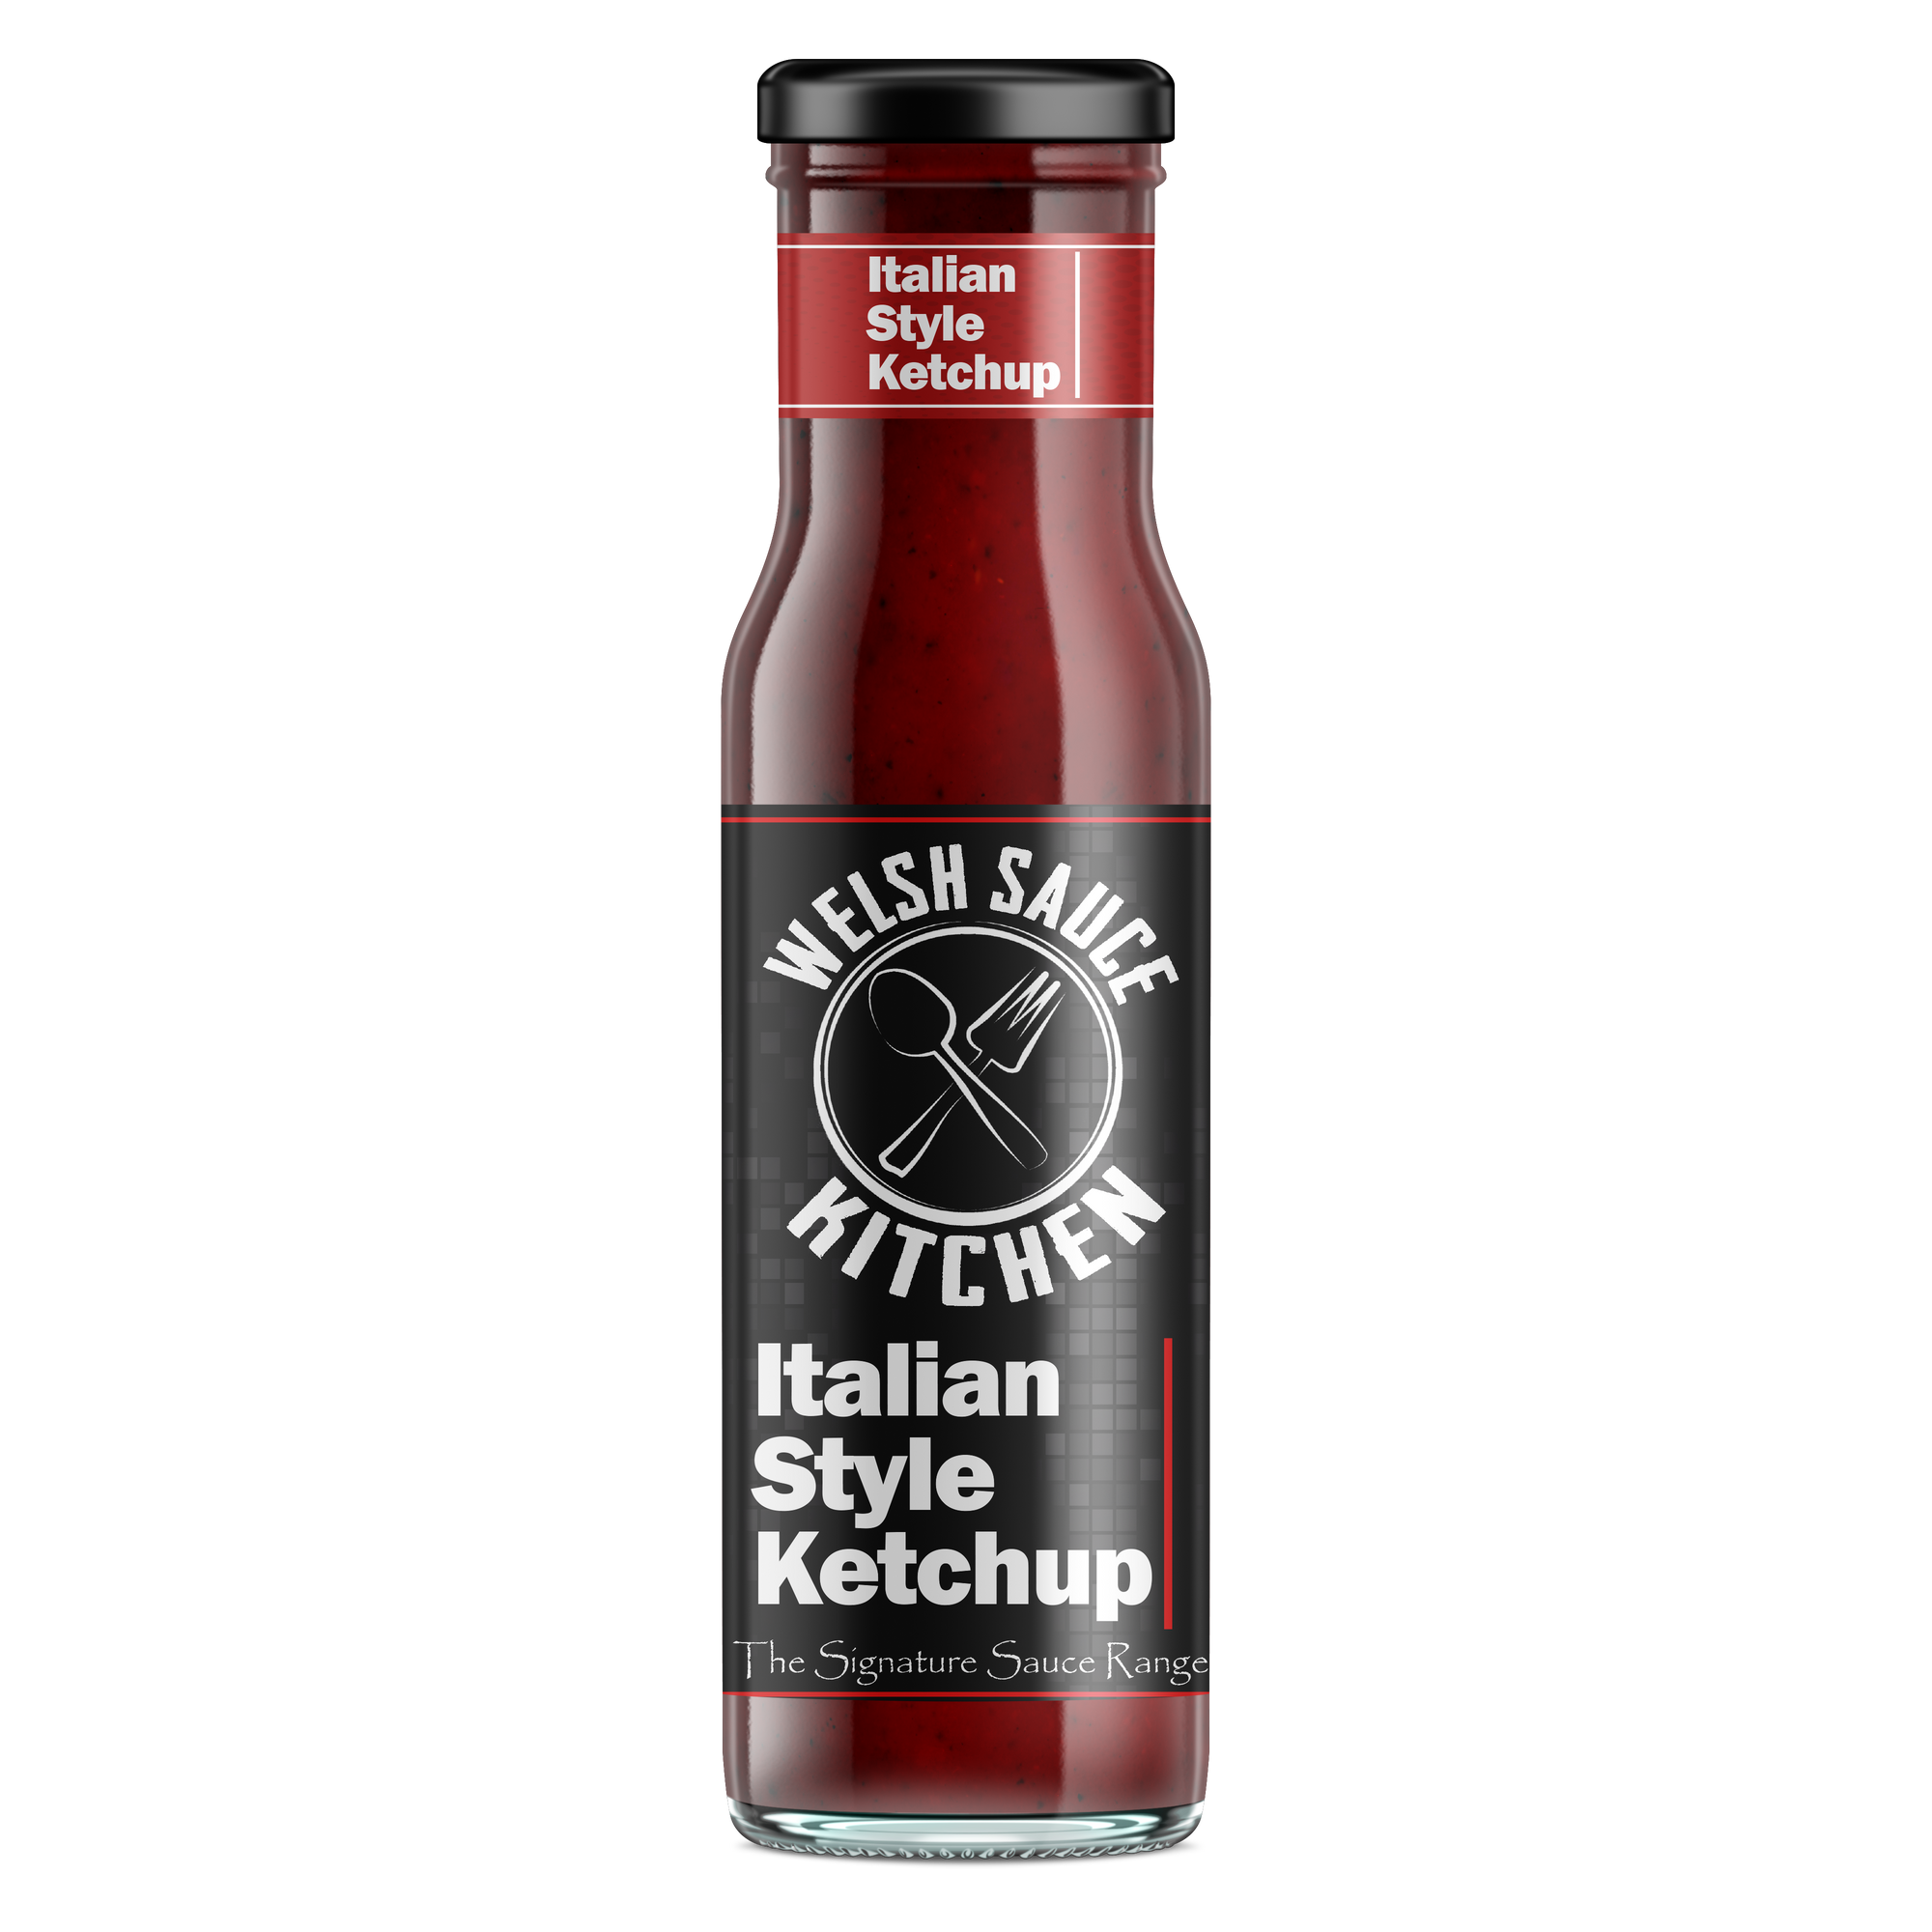 Welsh Sauce Kitchen Italian Style Ketchup (270g)